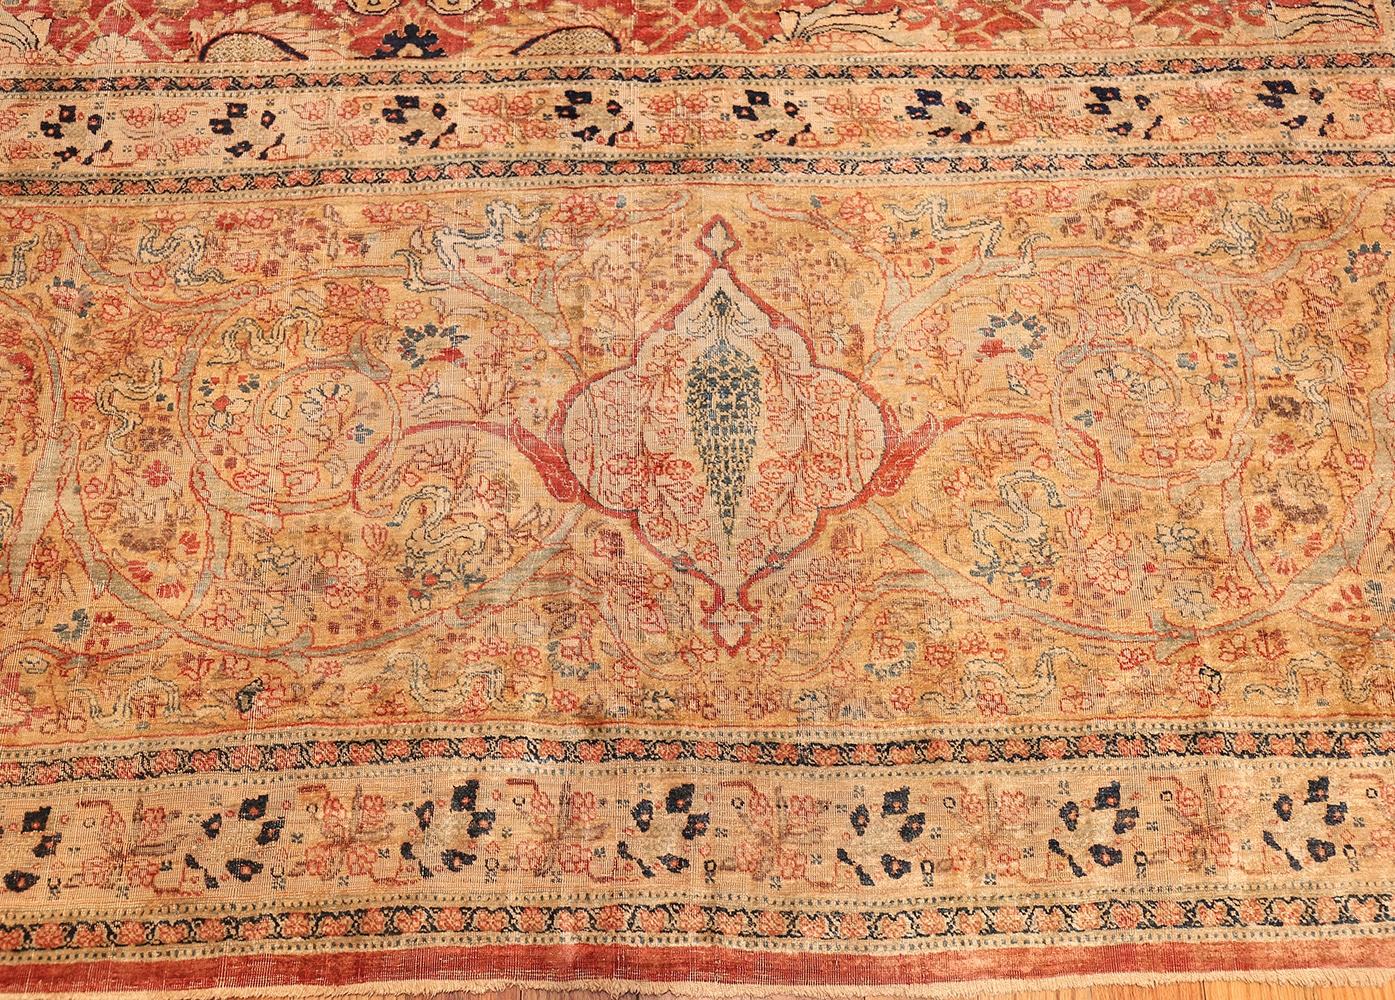 Finely Woven Large Oversized Antique Persian Silk Tabriz Haji Jalili Rug, Country of Origin / Rug Type: Persian Rugs, Circa Date: Late 19th Century. Size: 15 ft 8 in x 24 ft 6 in (4.78 m x 7.47 m)

Like so many other beautiful Tabriz pieces, this